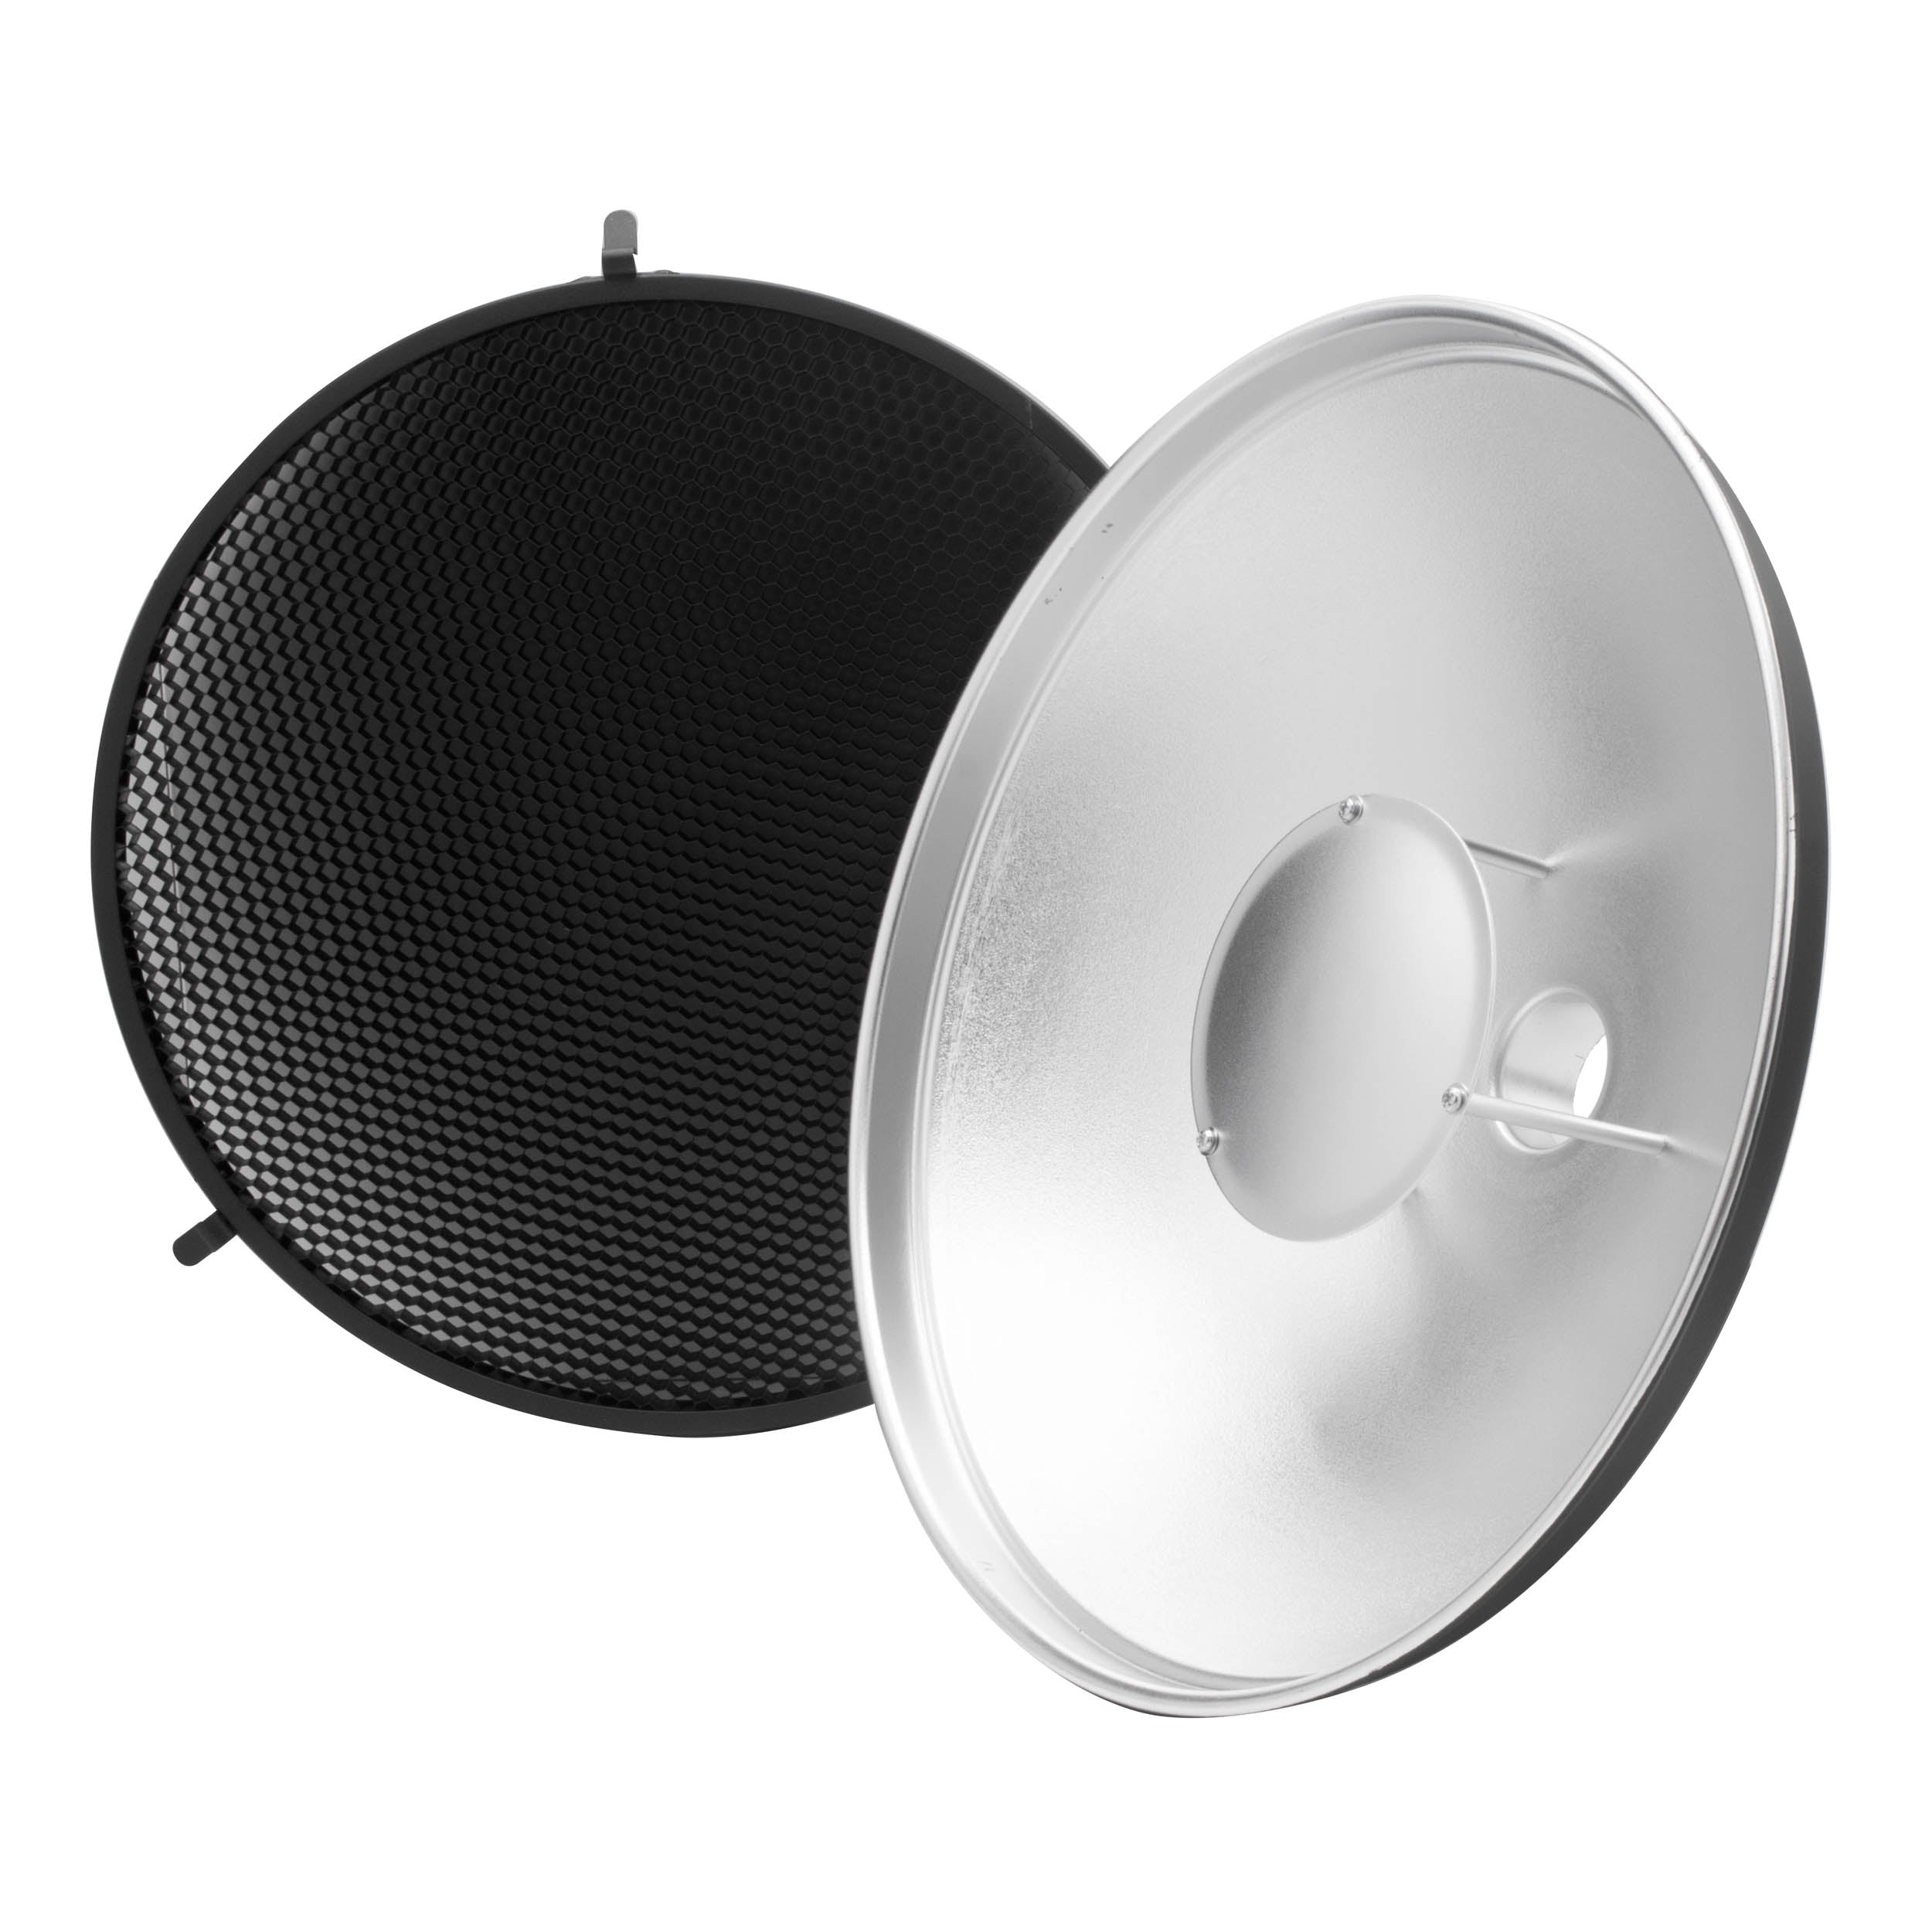 AD-S3 30.5cm (12") Beauty Dish with Honeycomb Grid  By Pixapro